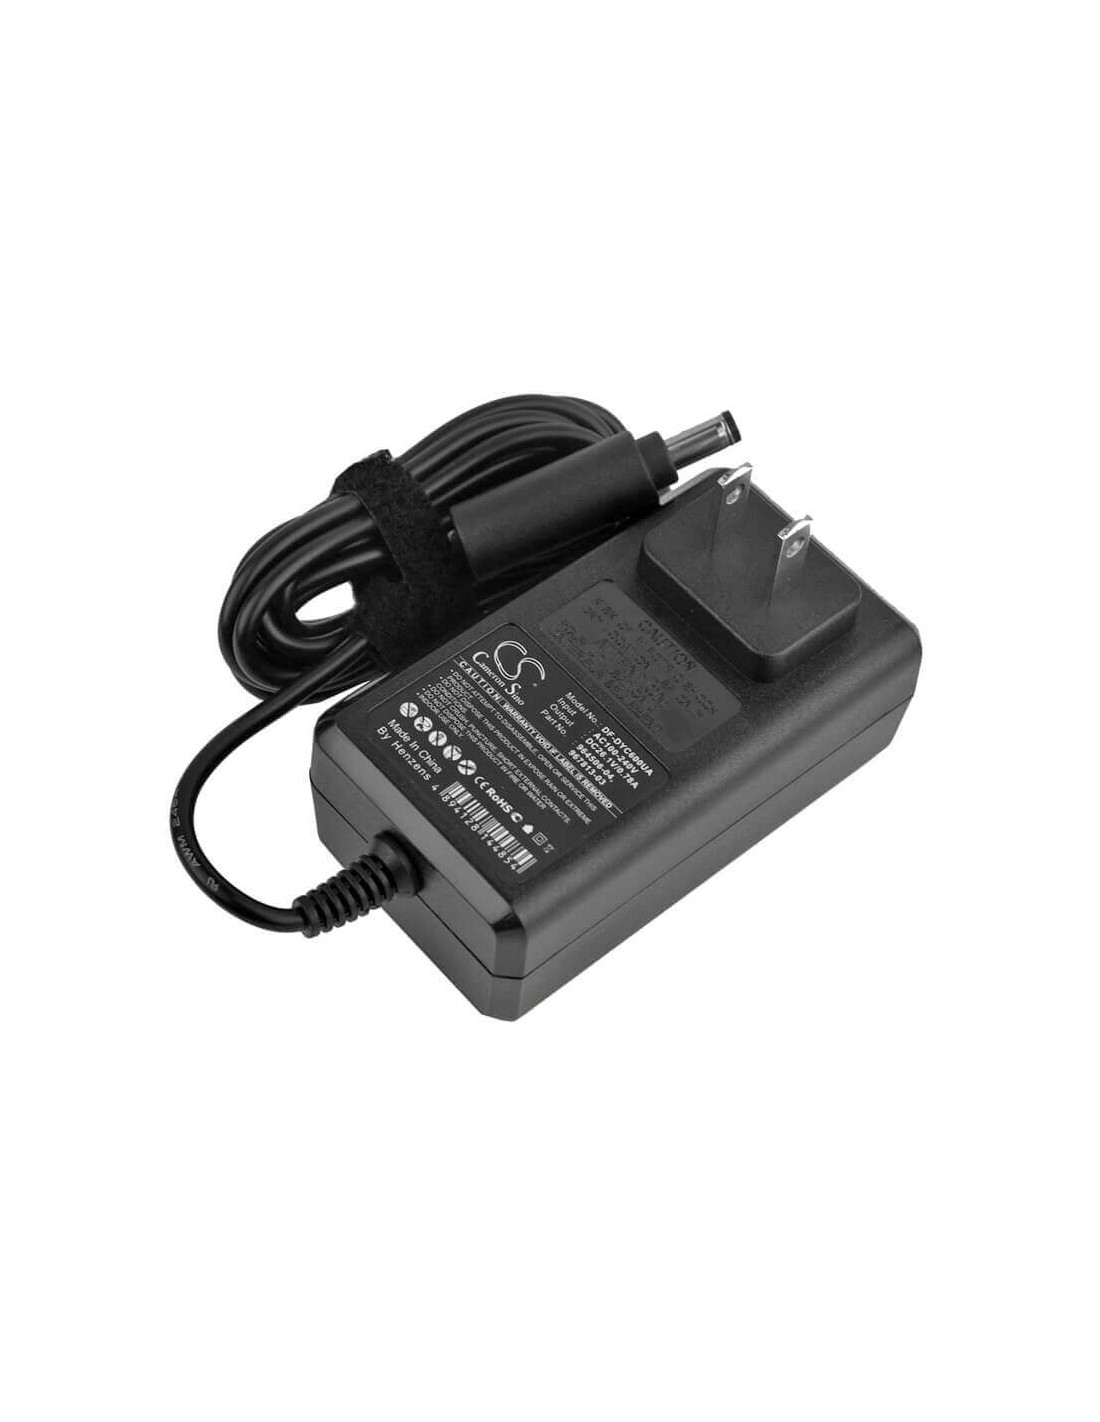 Battery Charger for Dyson, Dc58, Dc59, Dc59 Animal & Others